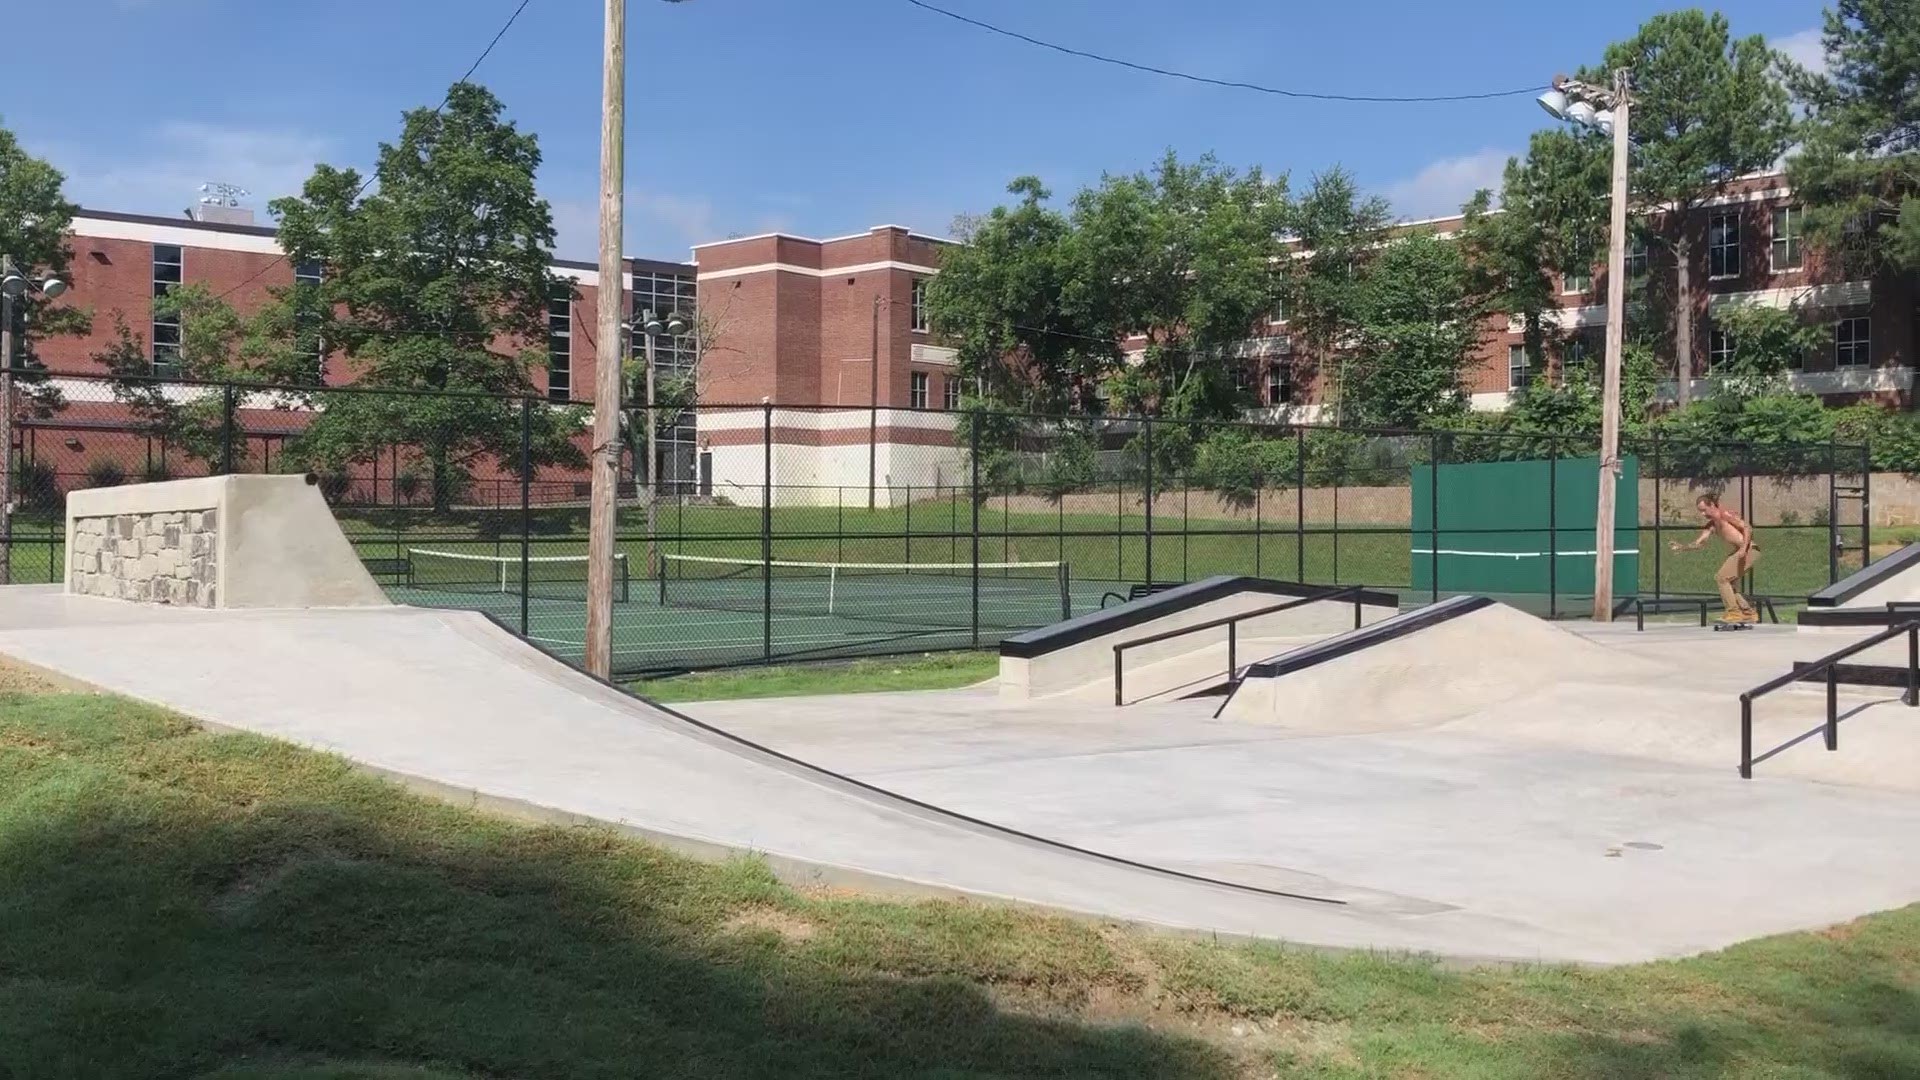 New Skate Park in Hapeville was completed during pandemic shutdown